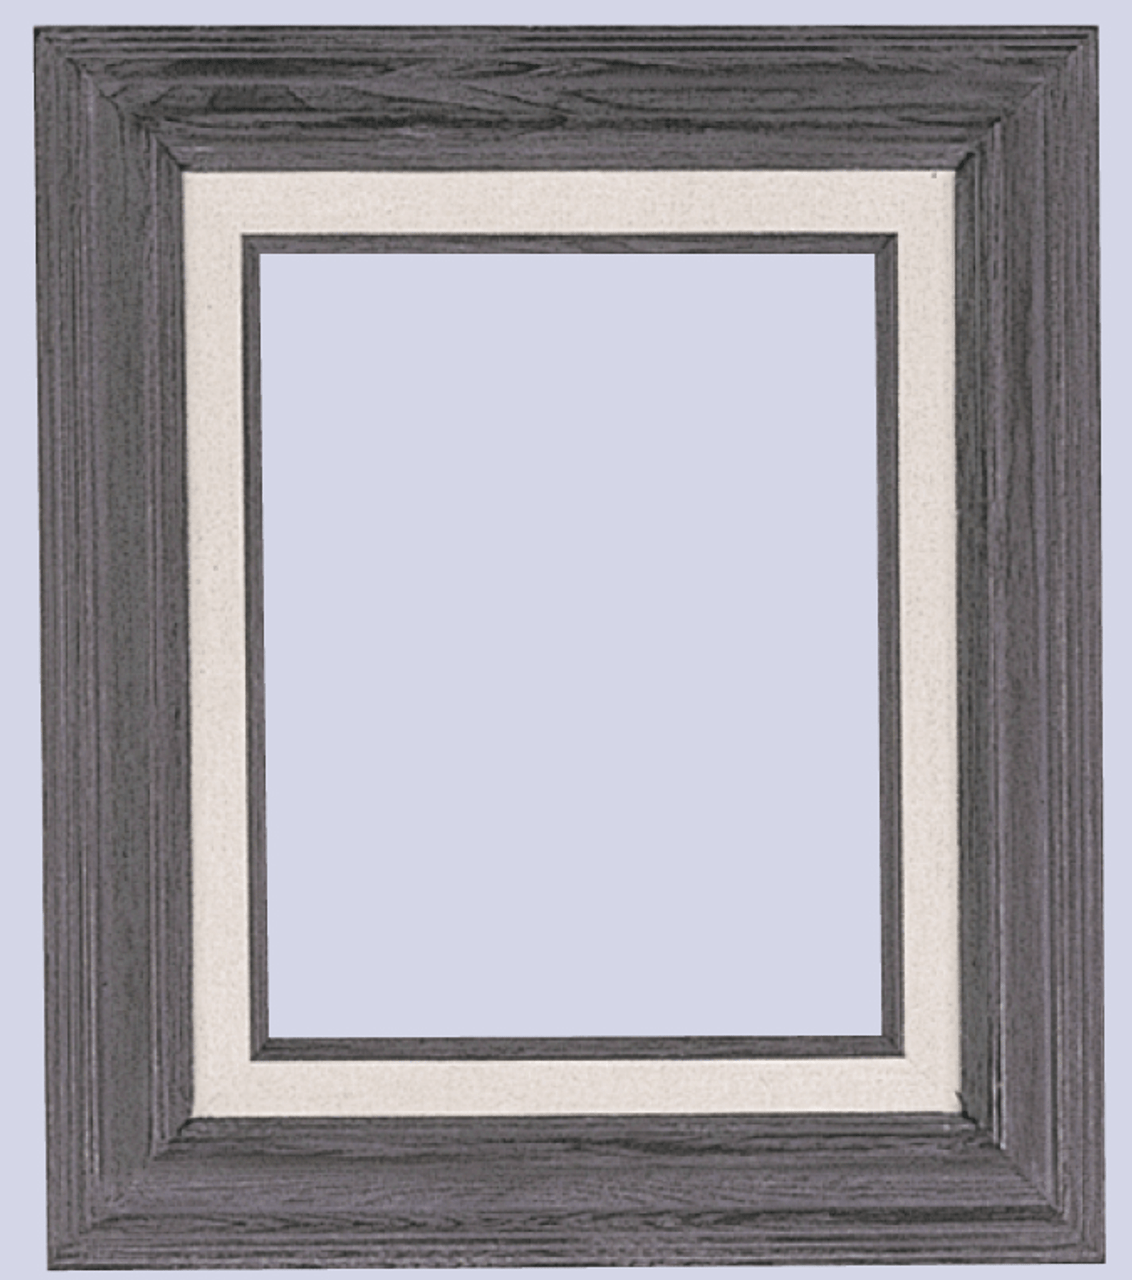  3 Inch Econo Wood Frames With Linen Liners: 10X13*